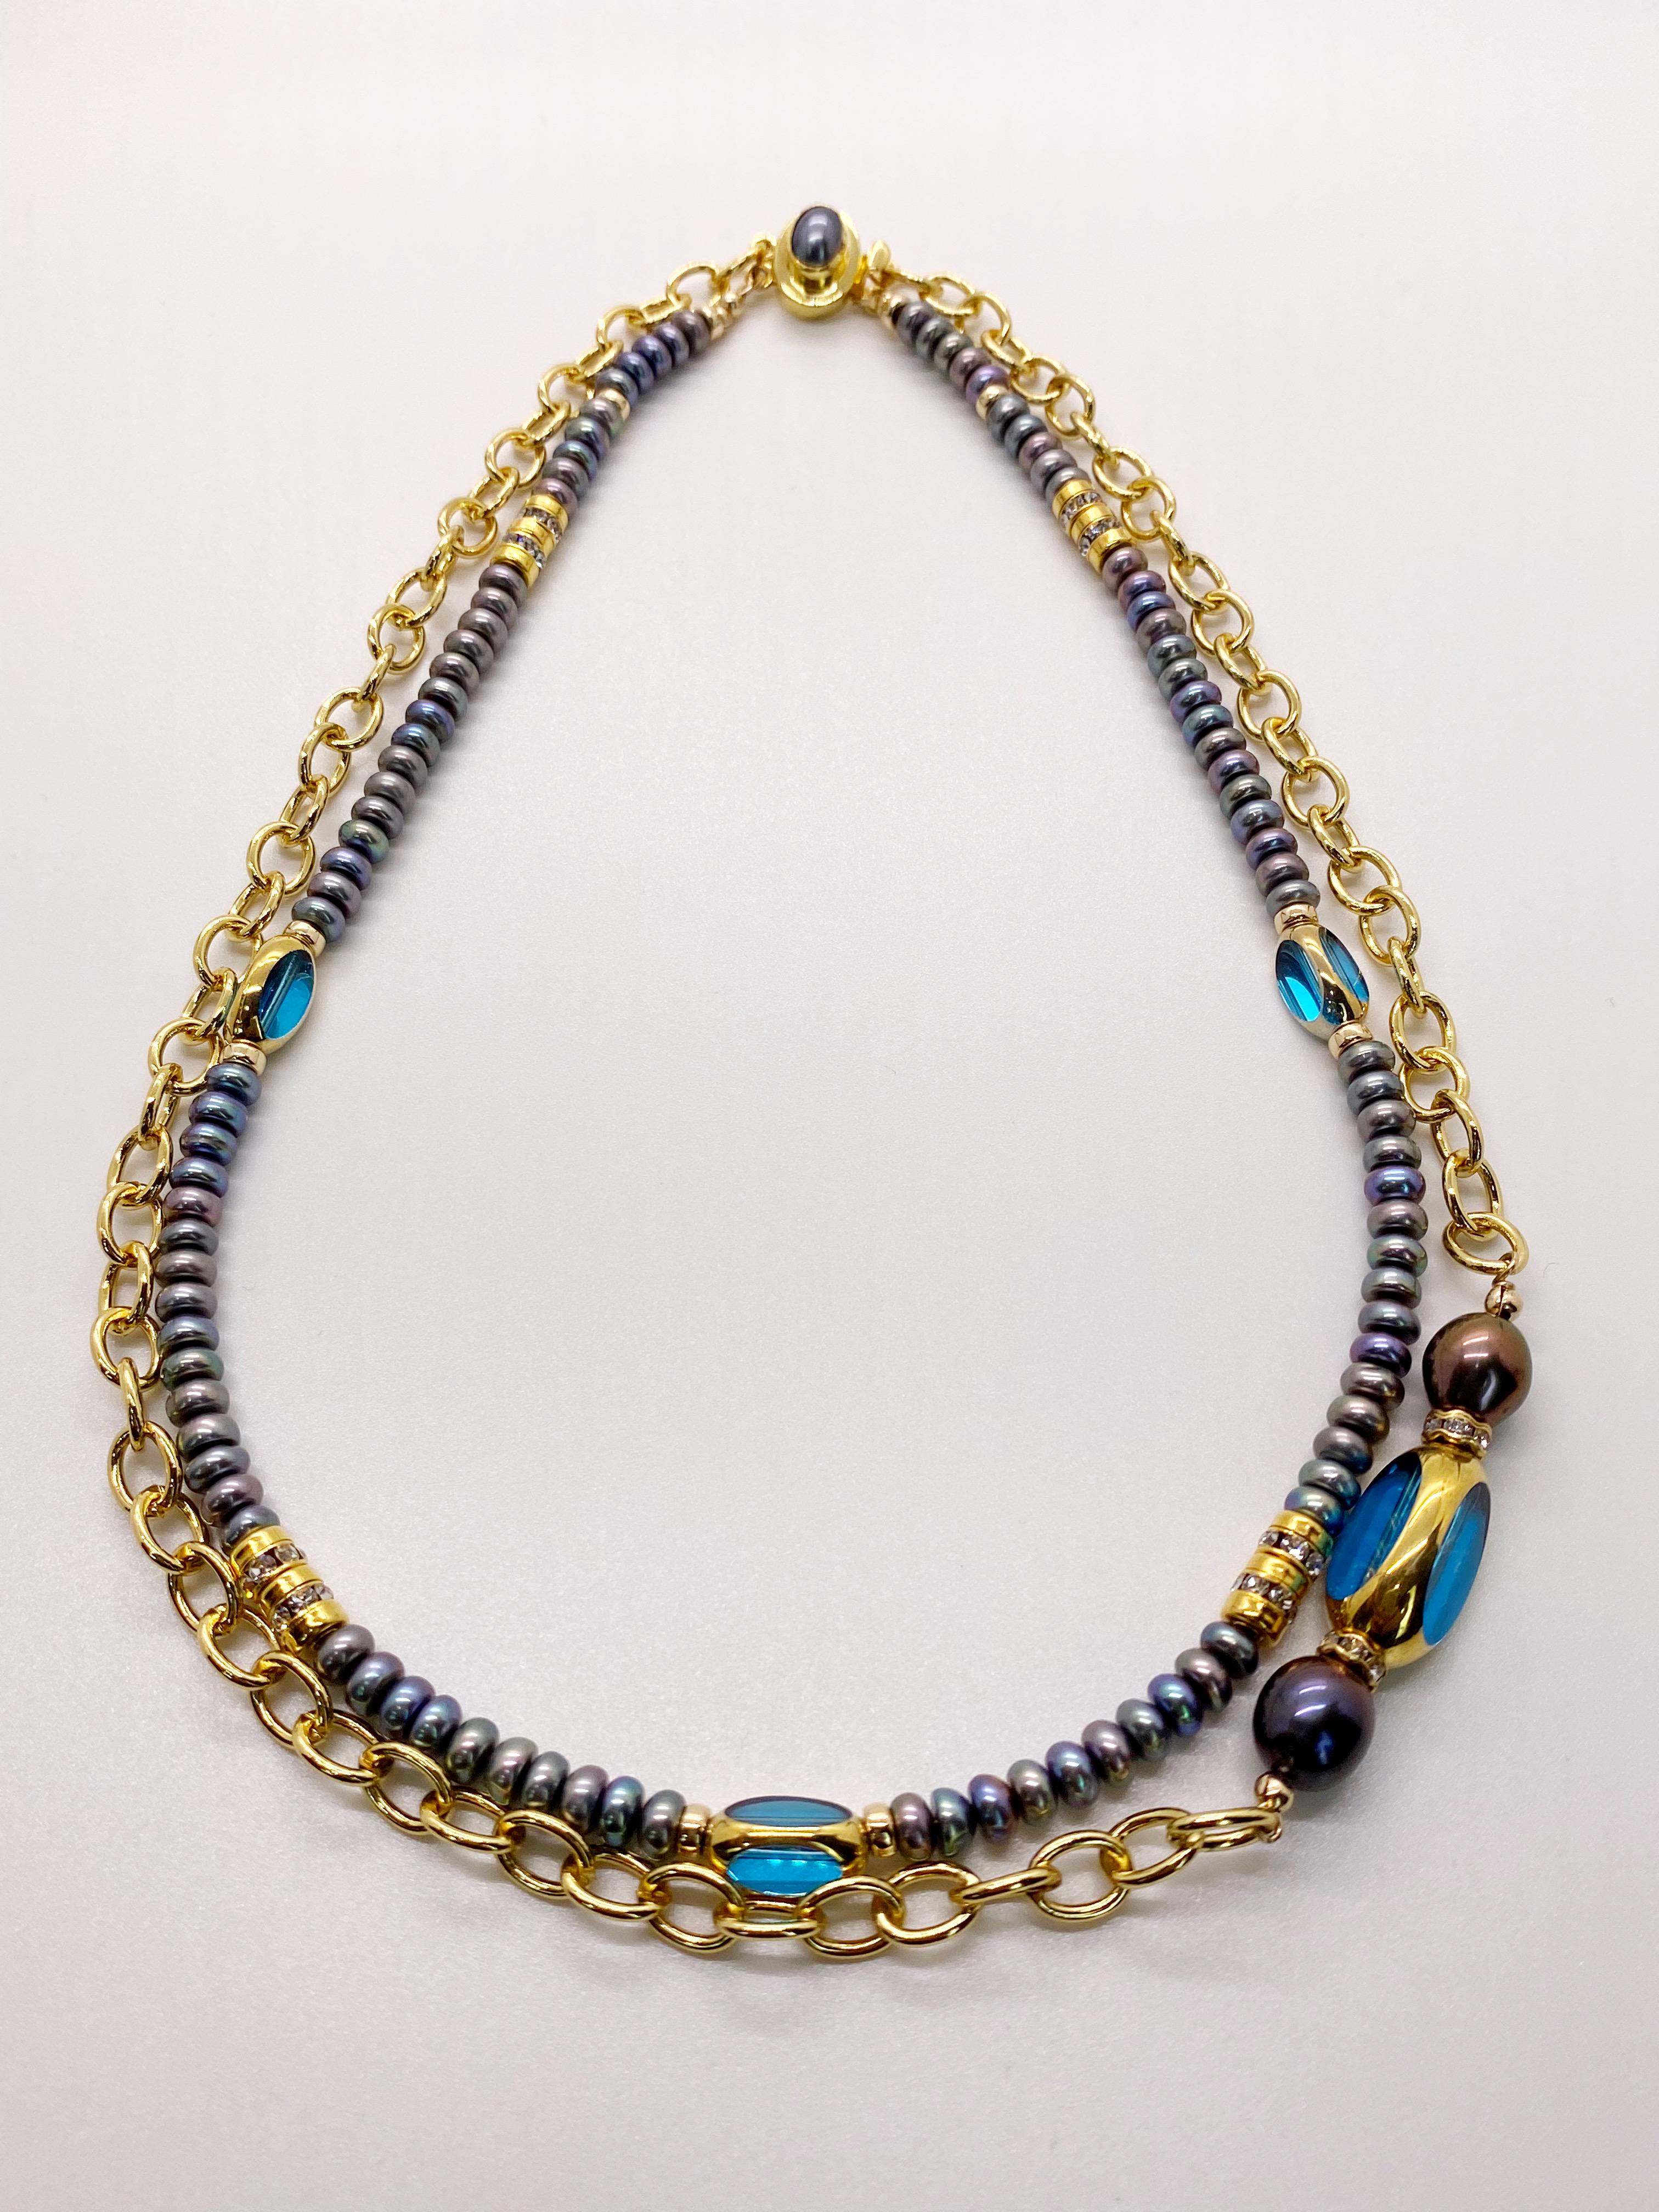 A one of a kind piece.

This necklace offers two strands on a Freshwater Peacock Pearl Vermeil Clasp. One strand is made of Freshwater Peacock Button shaped Pearls adorned with Swarovski Rhinestones, 14K gold filled roundelle beads and 24K Gold